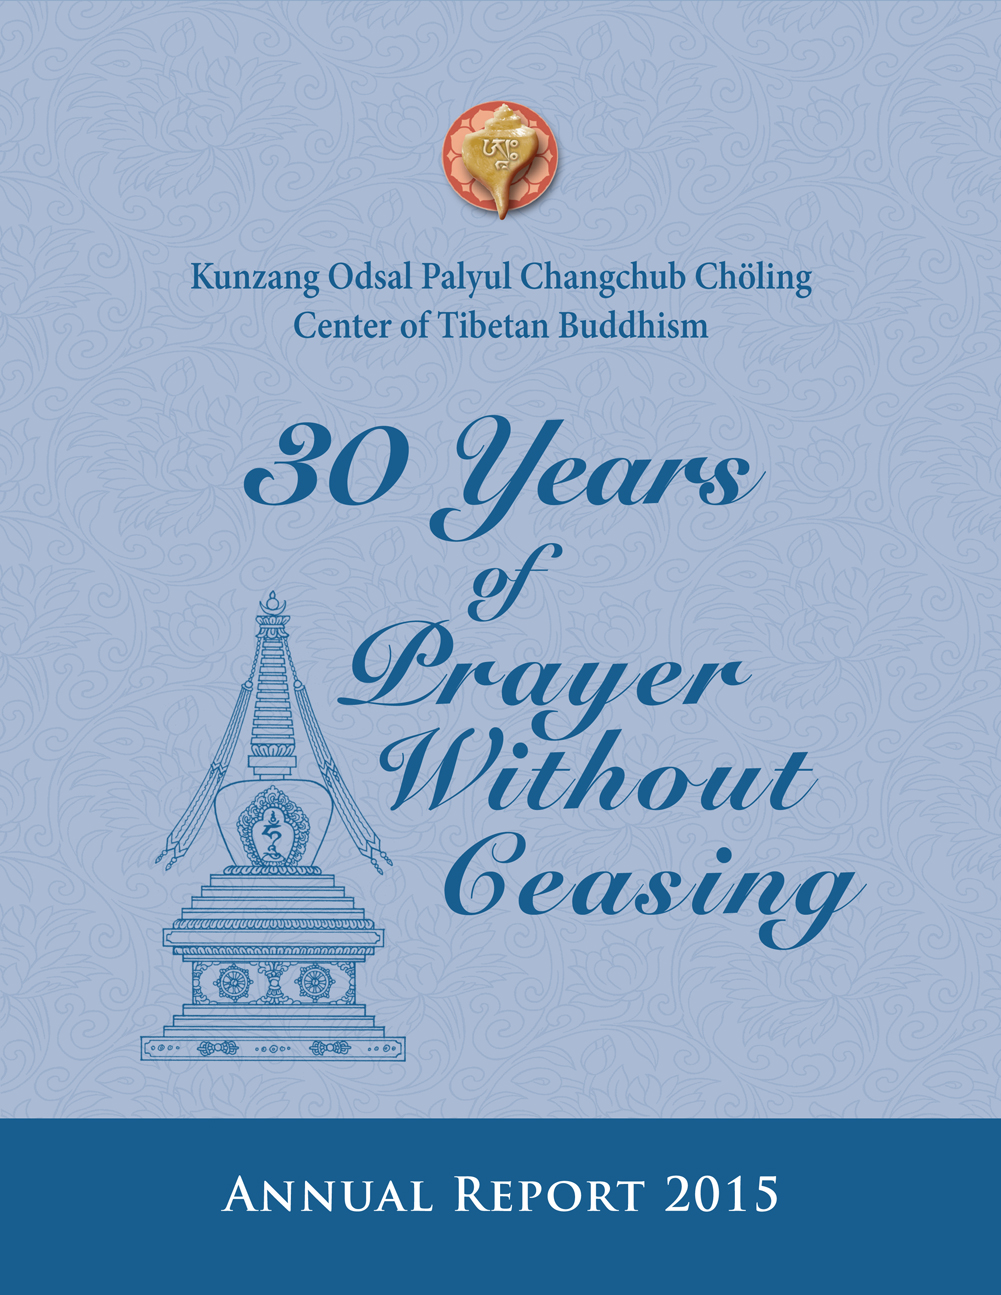 KPC 2015 Annual Report - 30 Years of Prayer without Ceasing